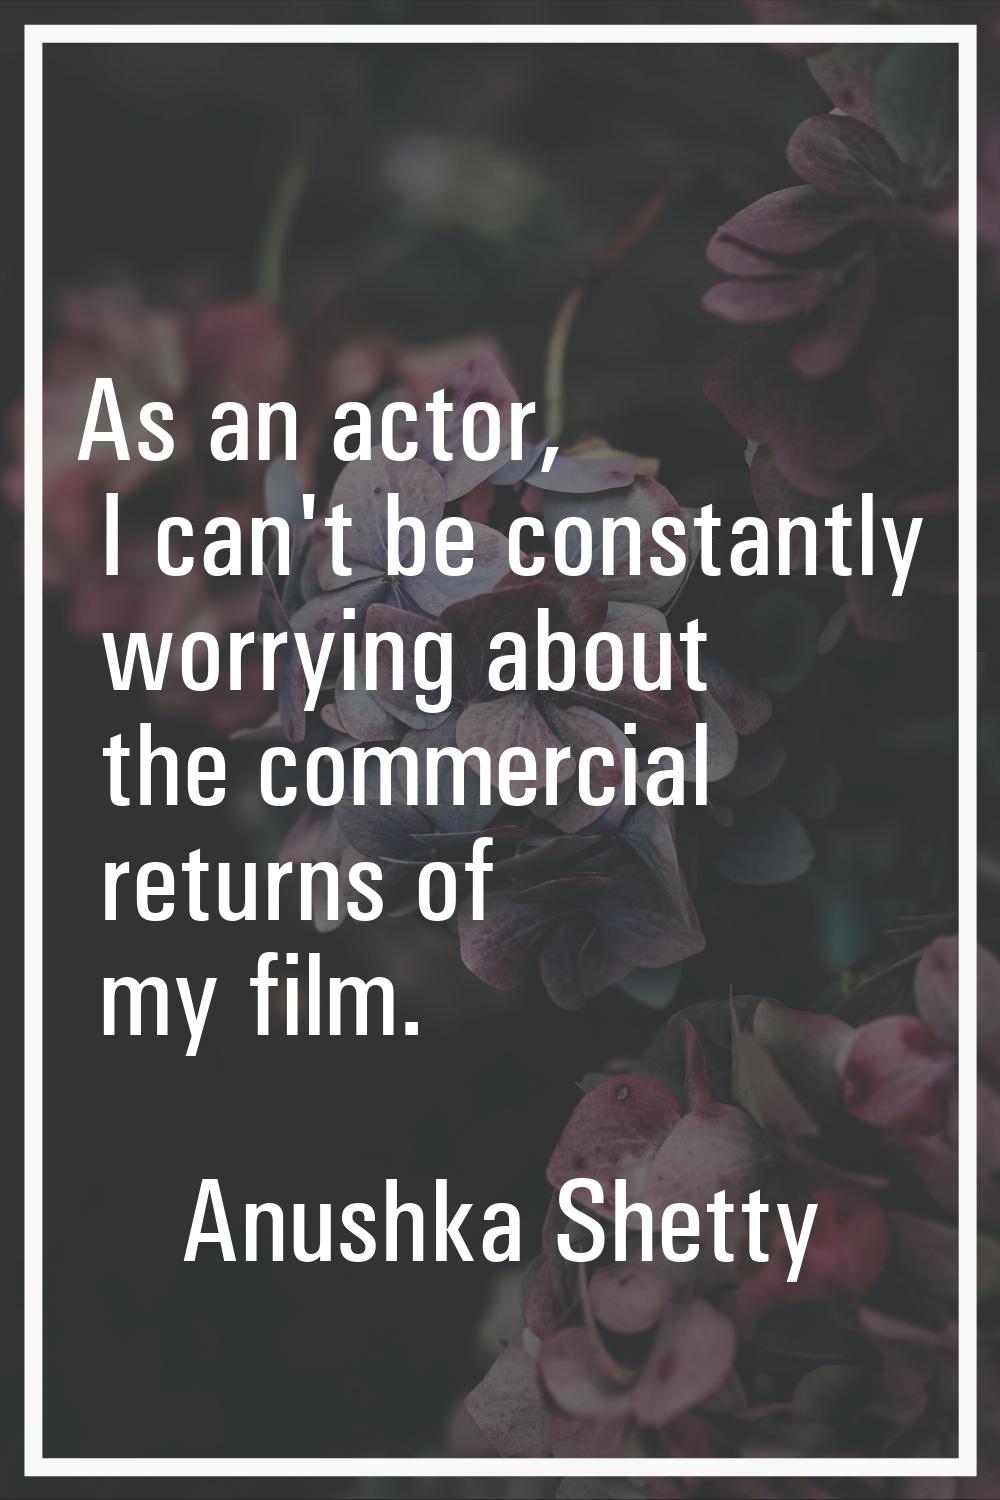 As an actor, I can't be constantly worrying about the commercial returns of my film.